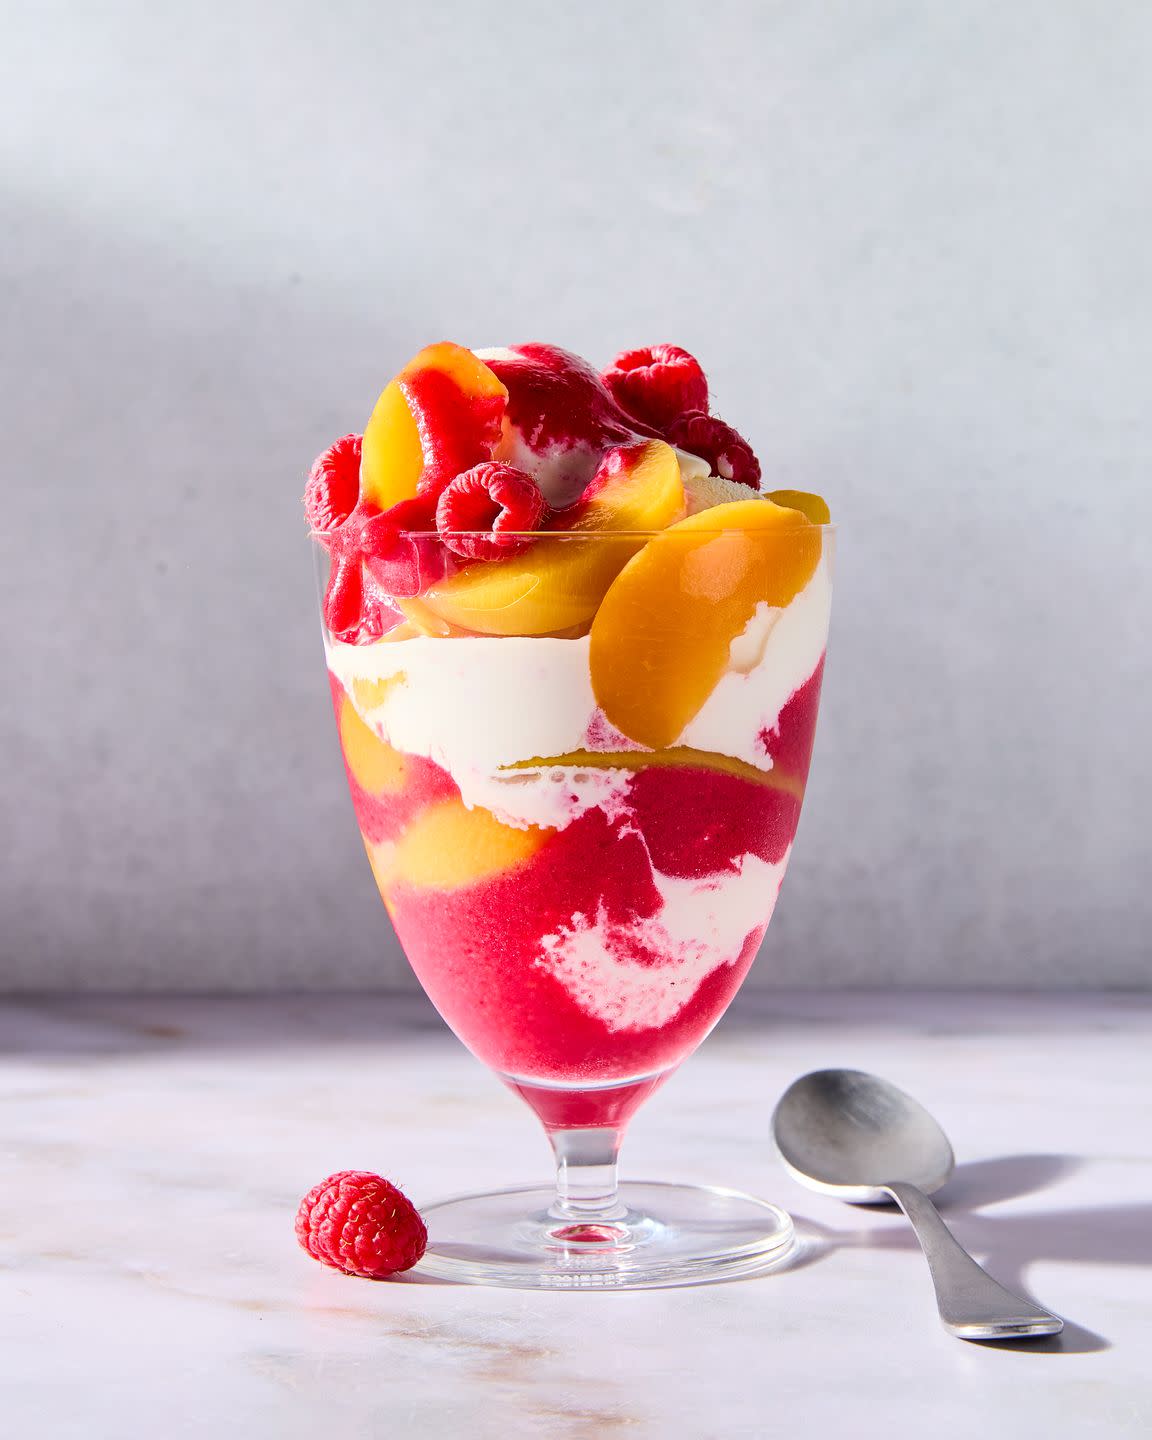 vanilla ice cream topped with peaches and raspberries